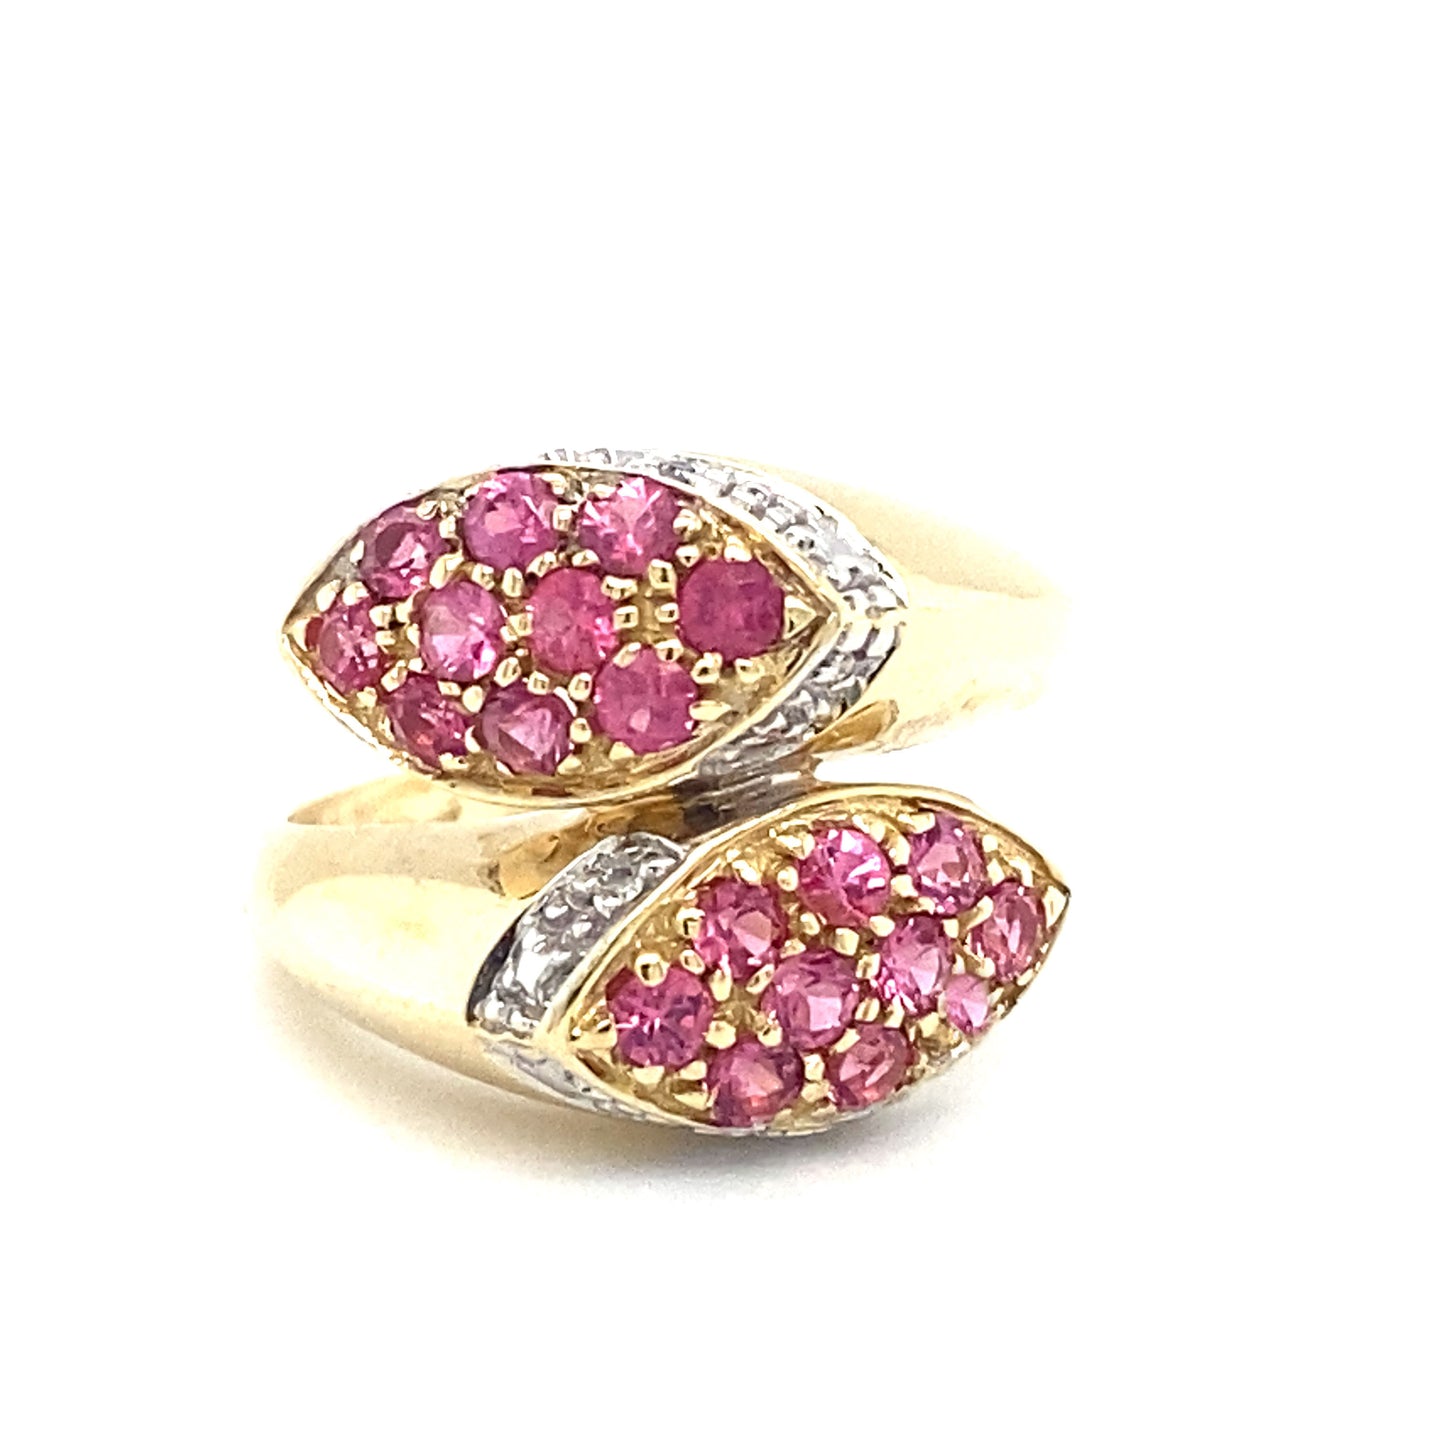 Circa 2000s Pink Sapphire and Diamond Bypass Ring in 14K Gold